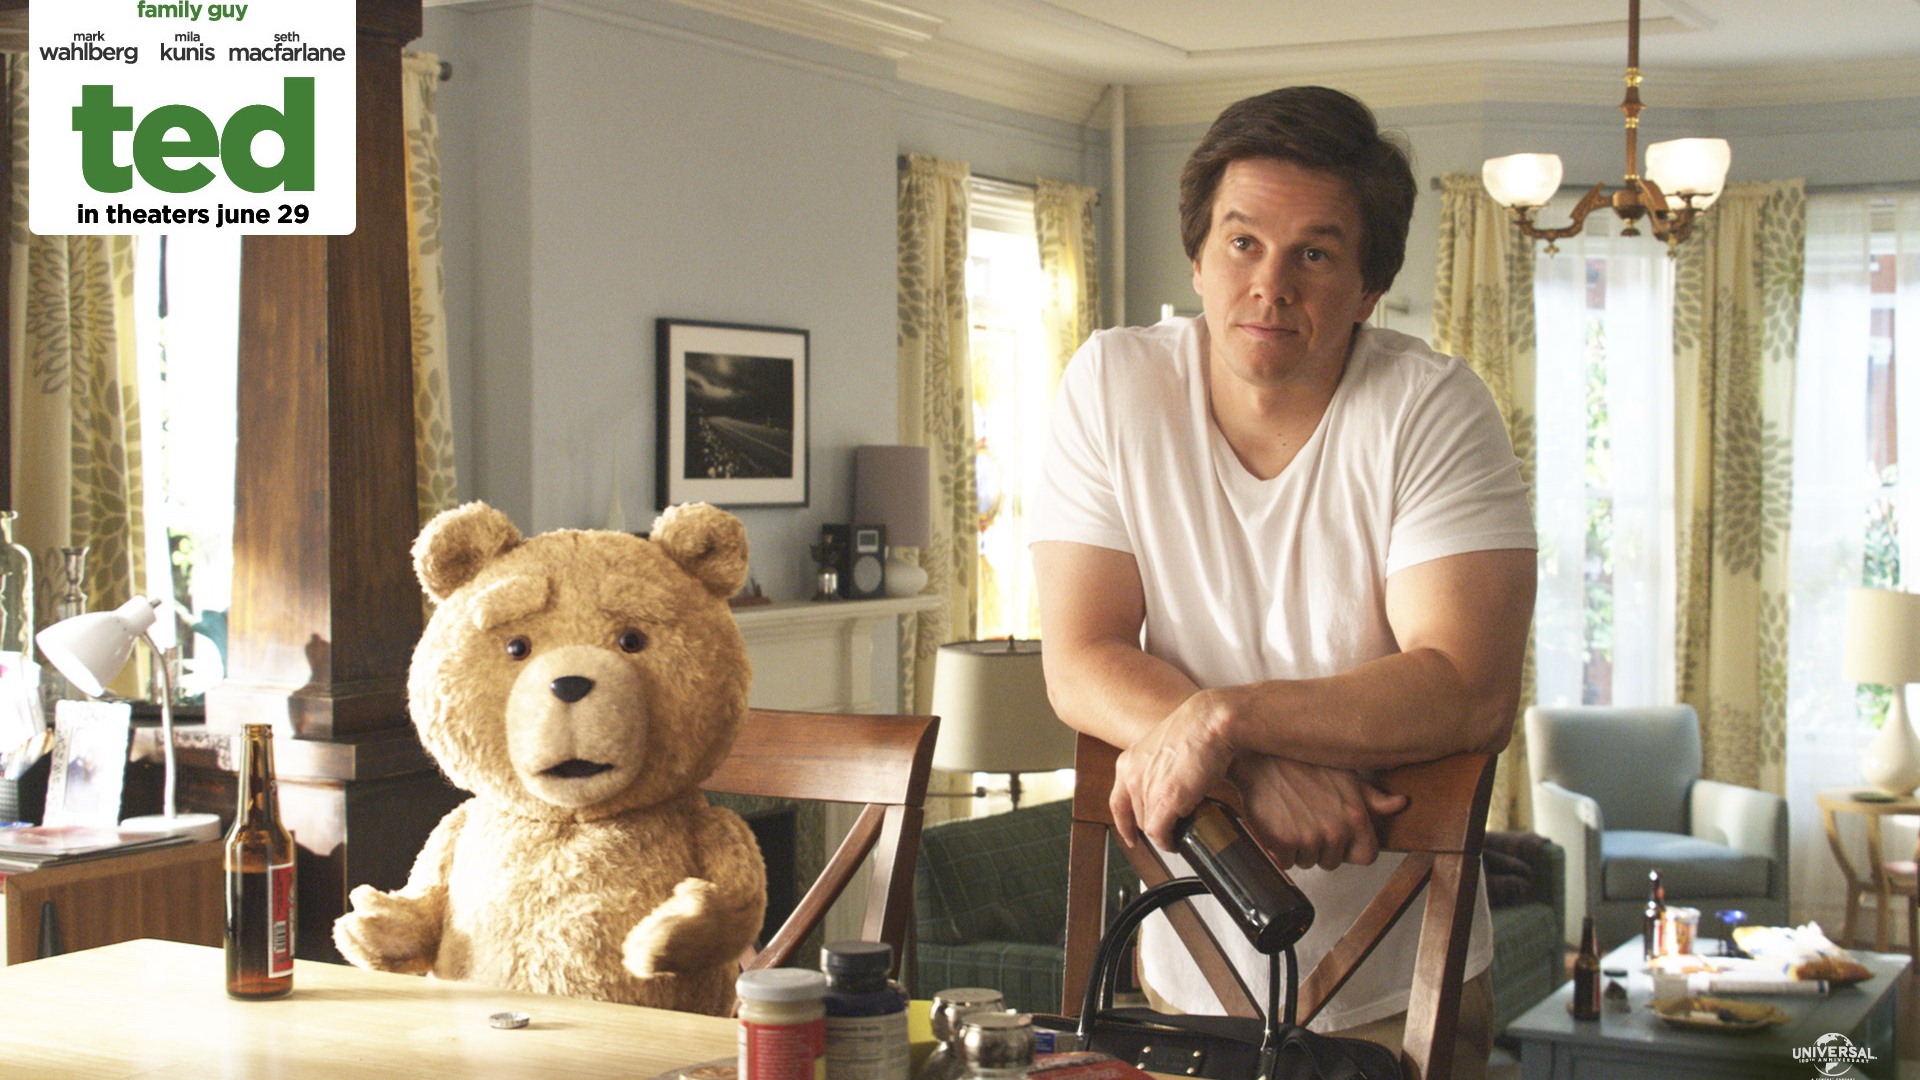 Ted 2012 HD movie wallpapers #3 - 1920x1080